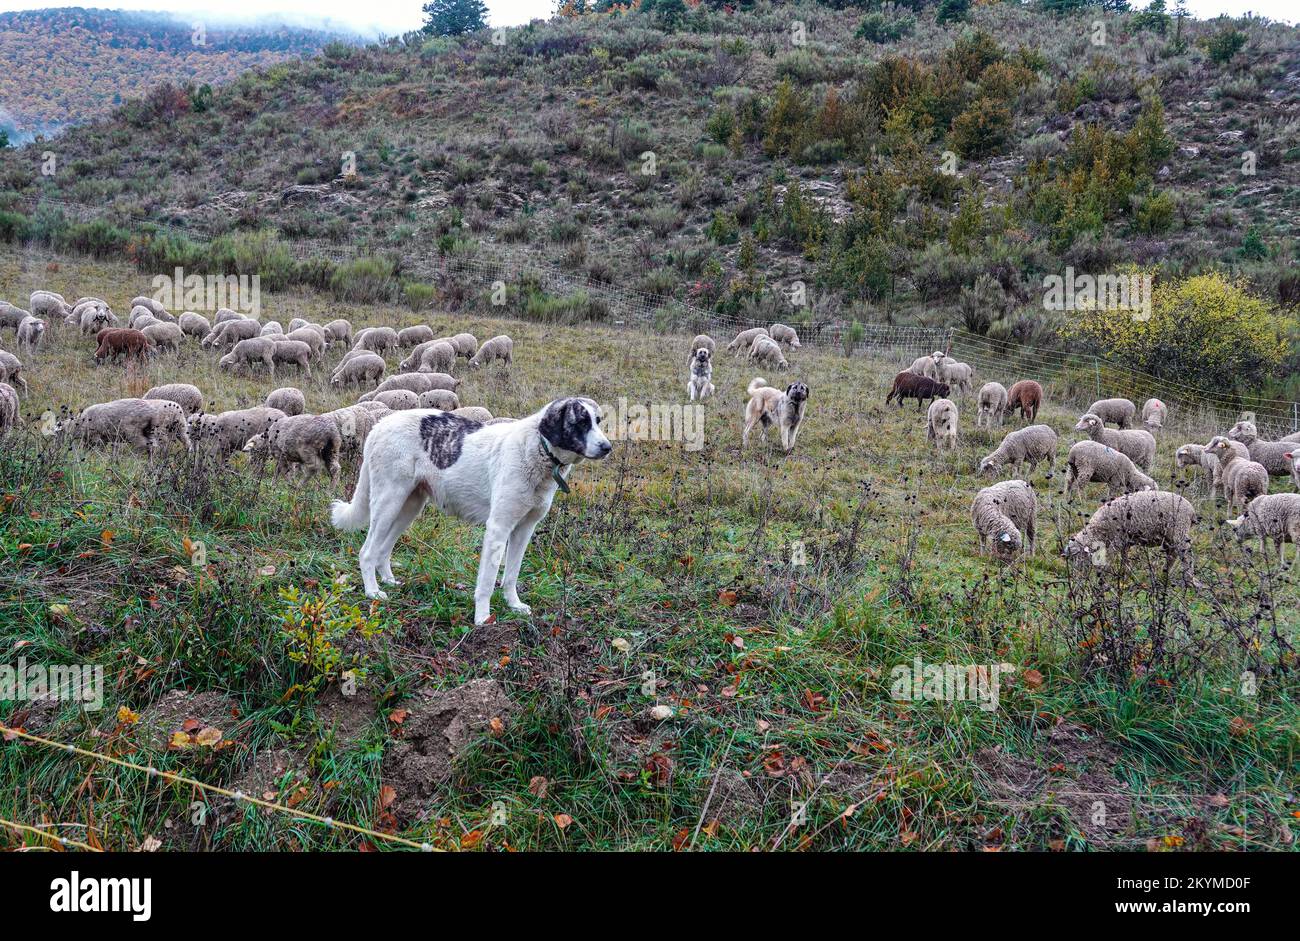 Sheepdogs guarding flock of sheep, Autumn in the Vercors mountains in Central France, Stock Photo